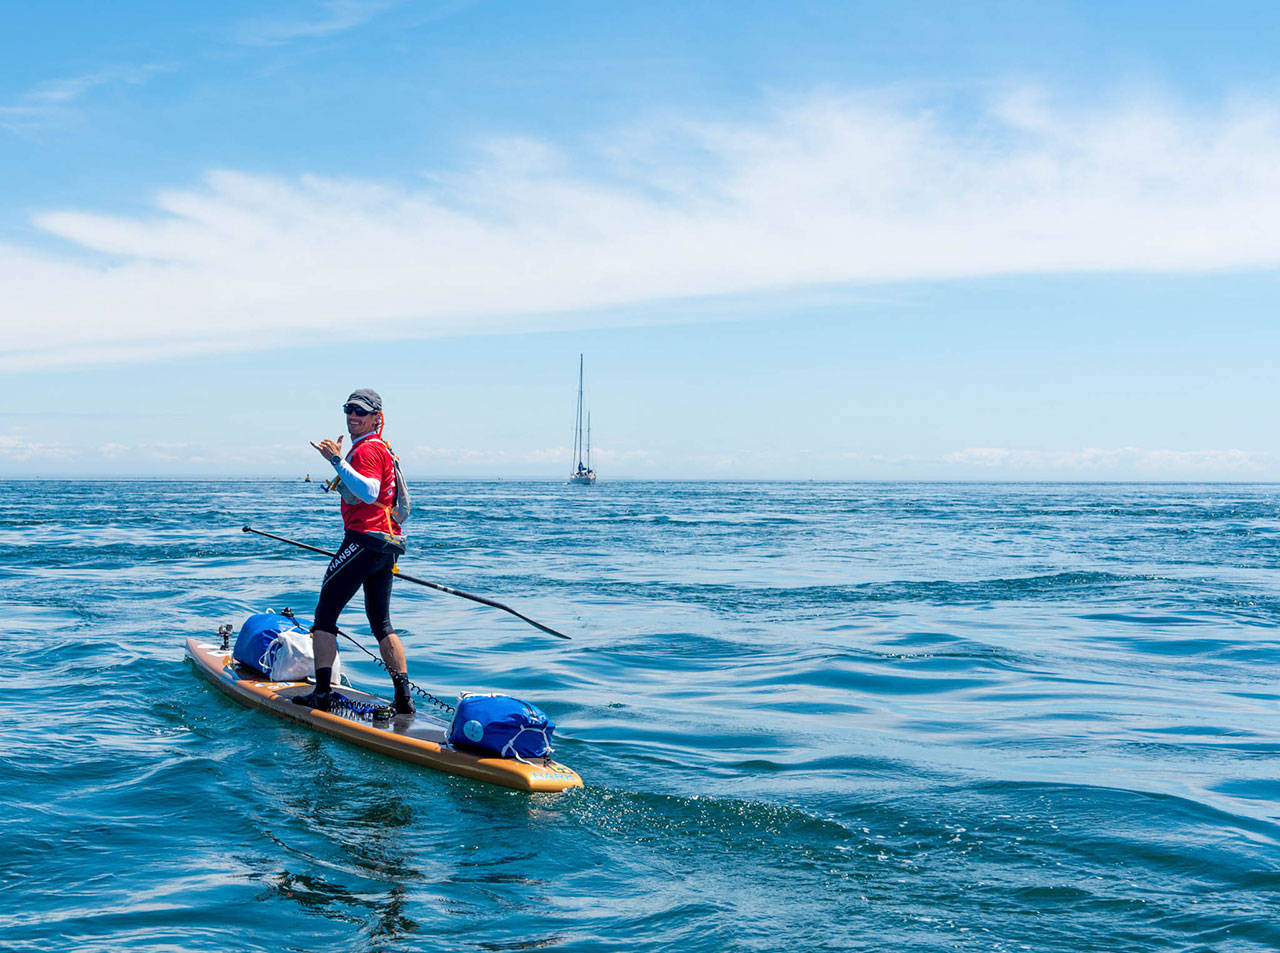 Karl Kruger arrived in Ketchikan, Alaska on Sunday as the first paddle-boarder to ever complete the 750-mile Race to Alaska. (Katrina Zoe Norbom/R2AK)